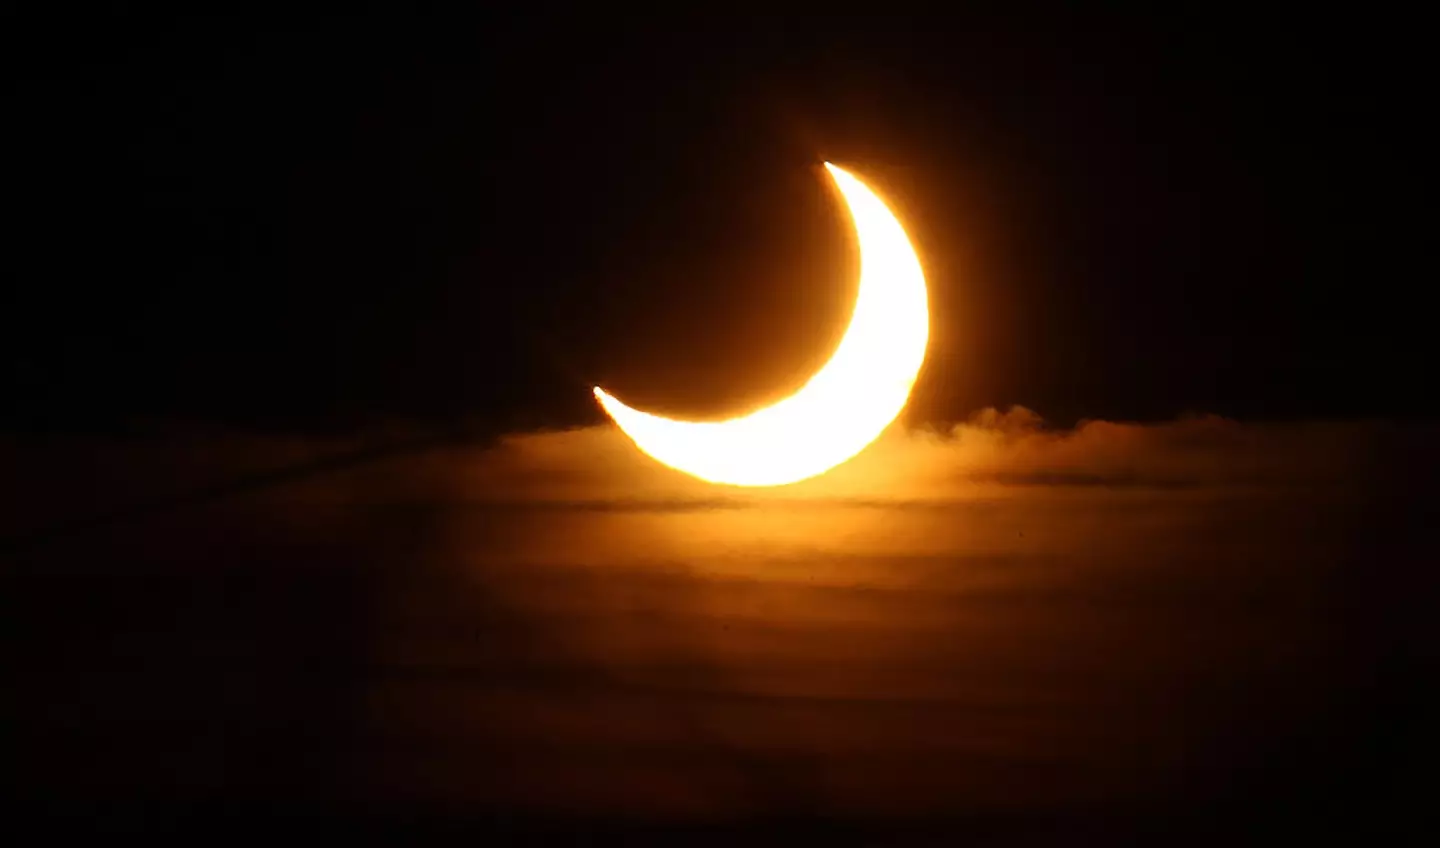 Parts of the UK could see a partial eclipse.